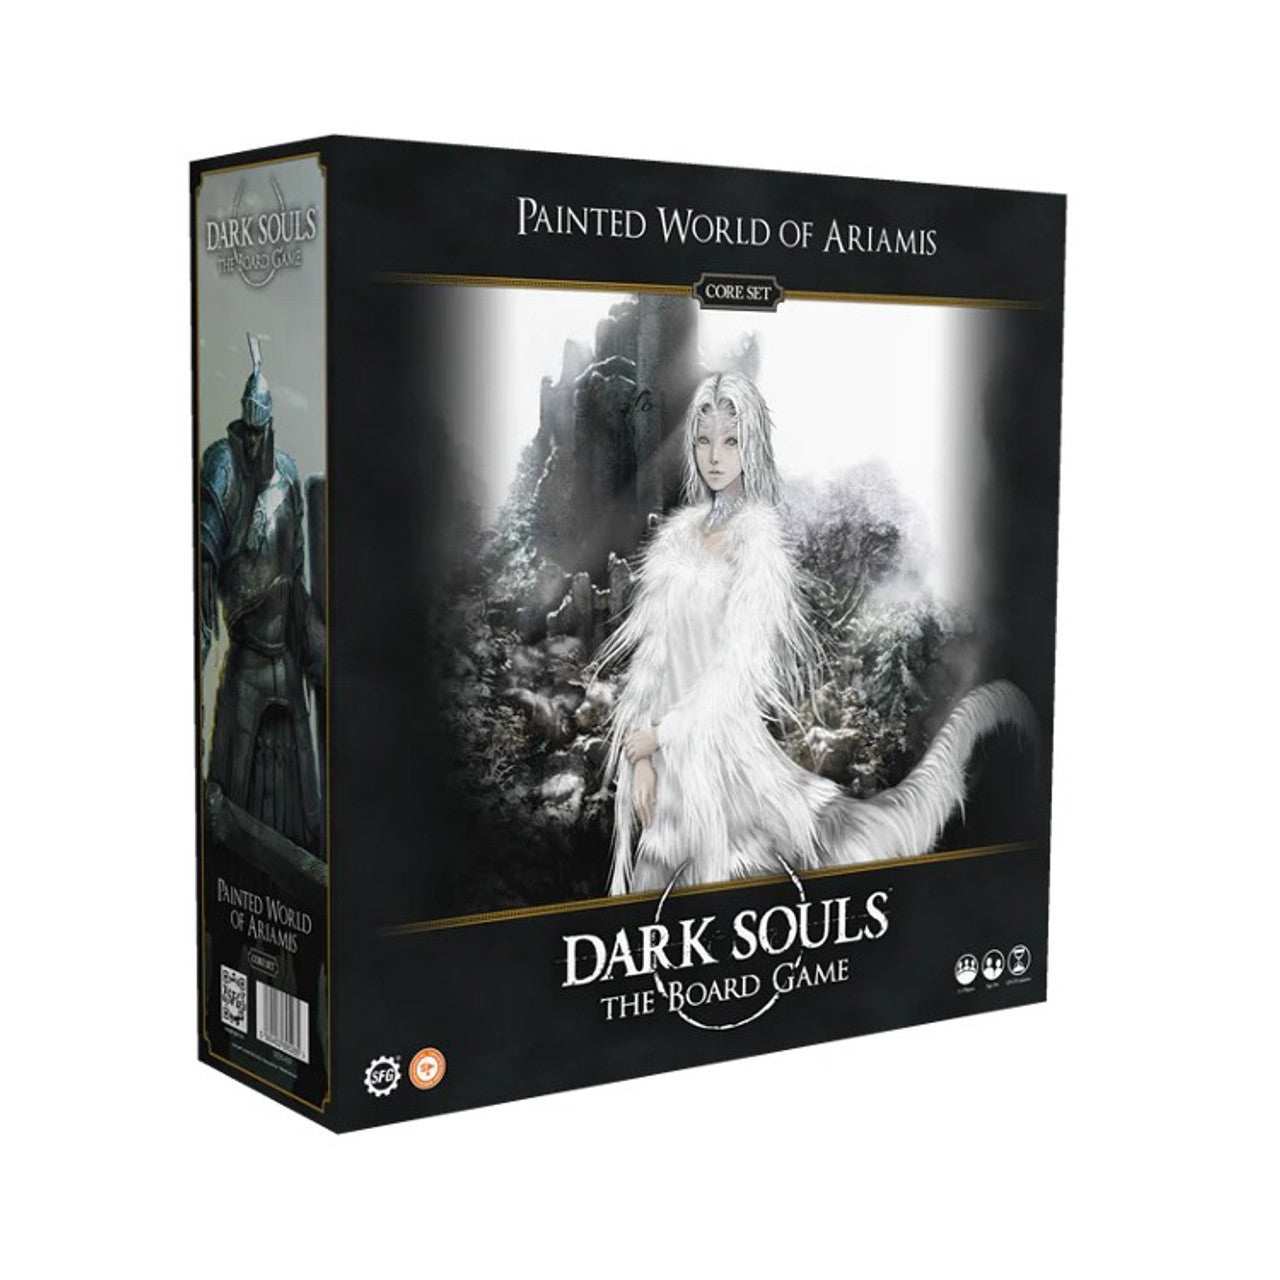 Dark Souls: The Board Game: The Painted World of Ariamis Core Set